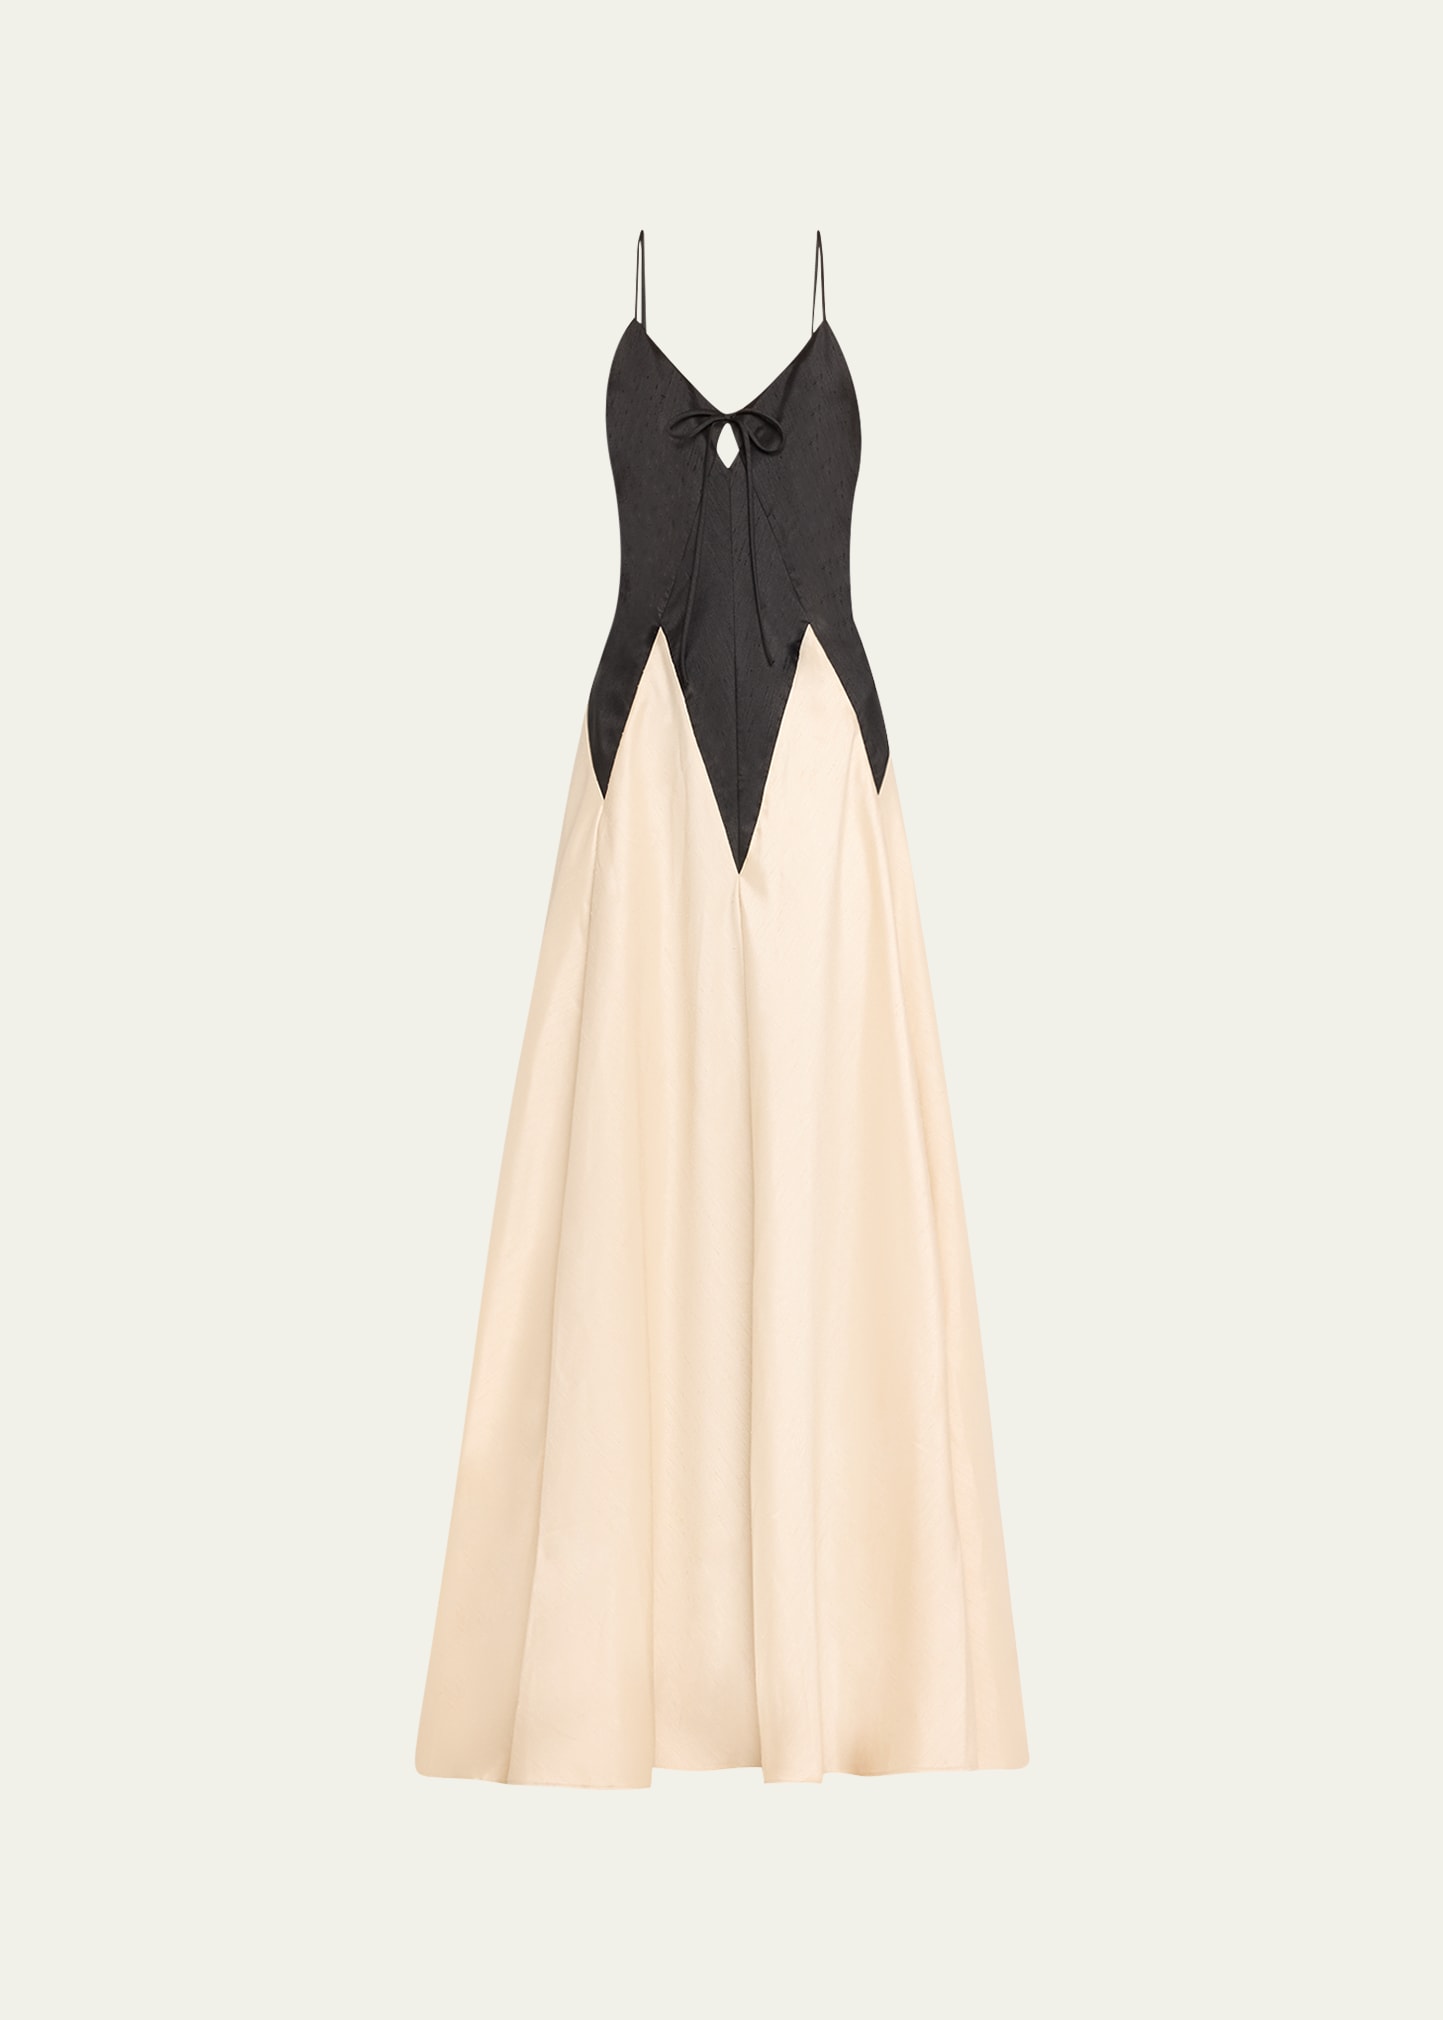 ROSIE ASSOULIN CONTRAST GOWN WITH TIE FRONT DETAIL